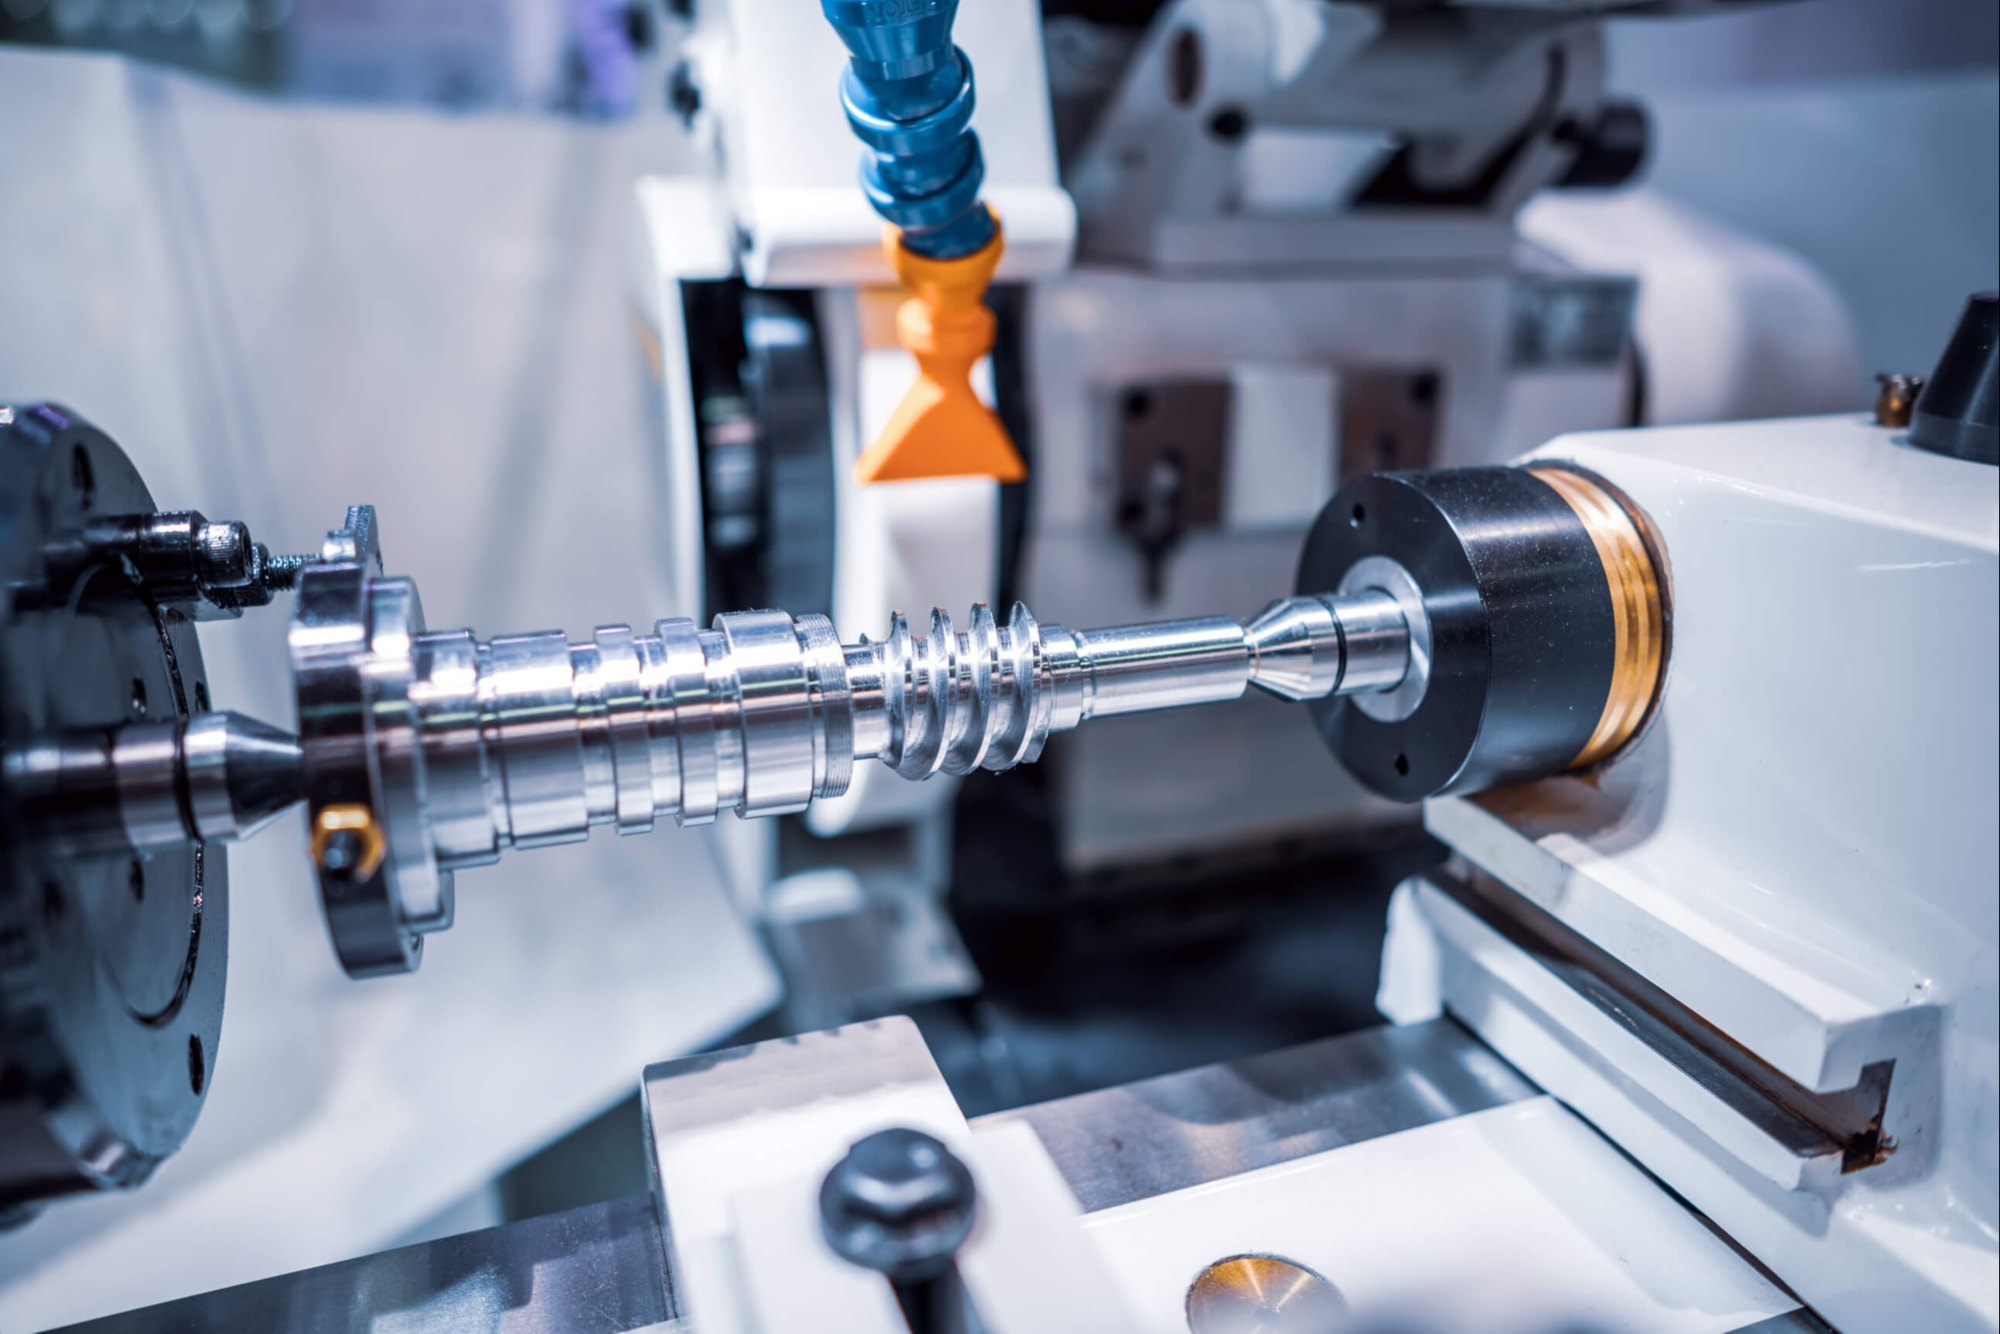 What should I consider when choosing a CNC machining service provider?